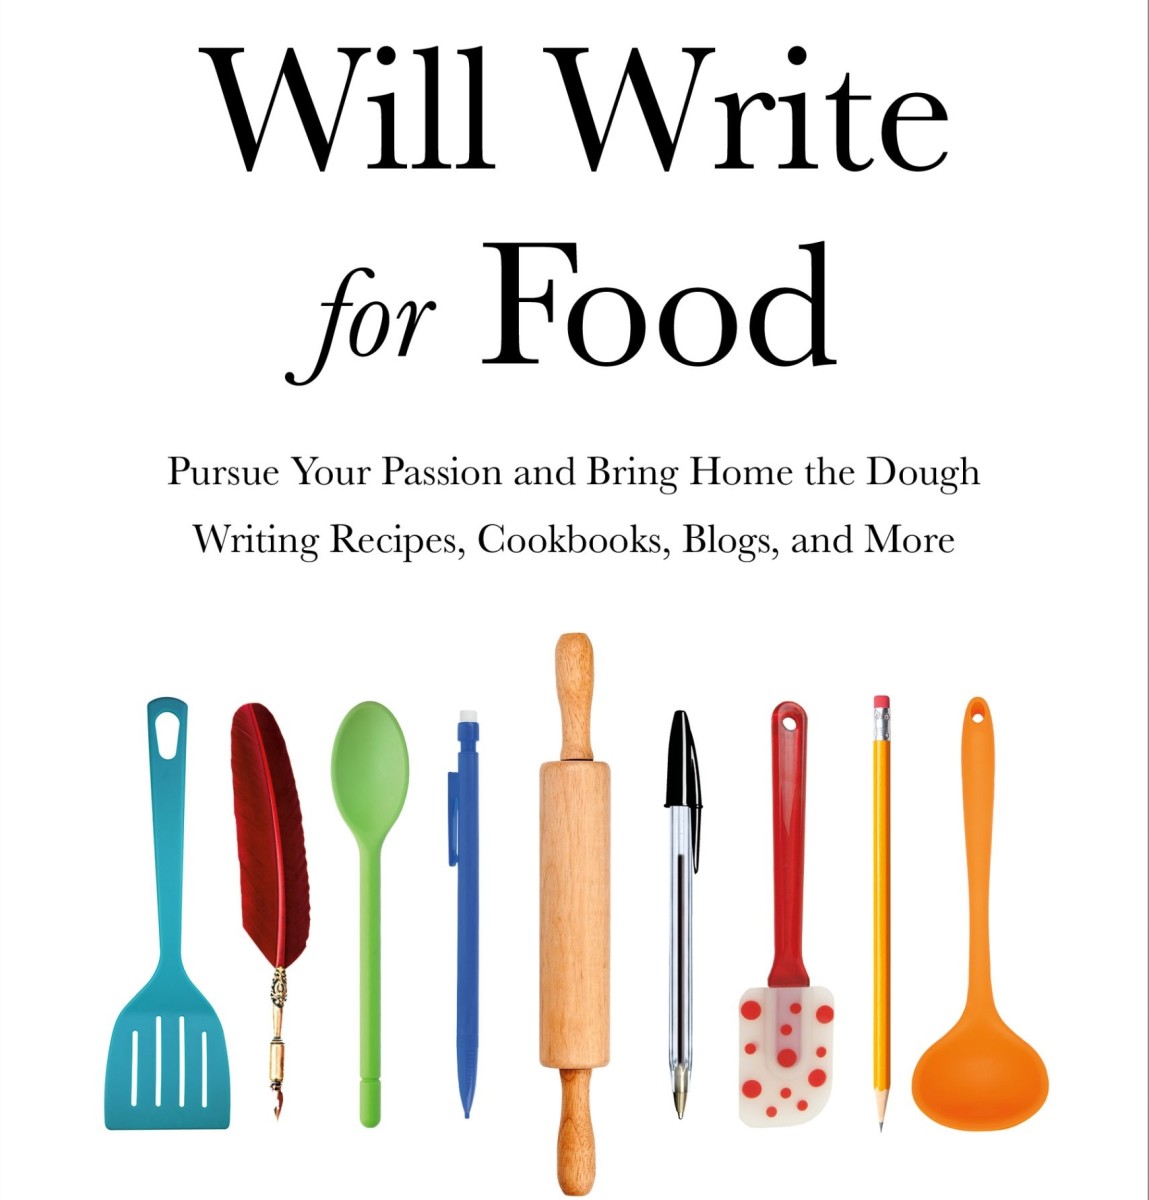 "Will Write For Food" 4th edition.by Dianne Jacob.